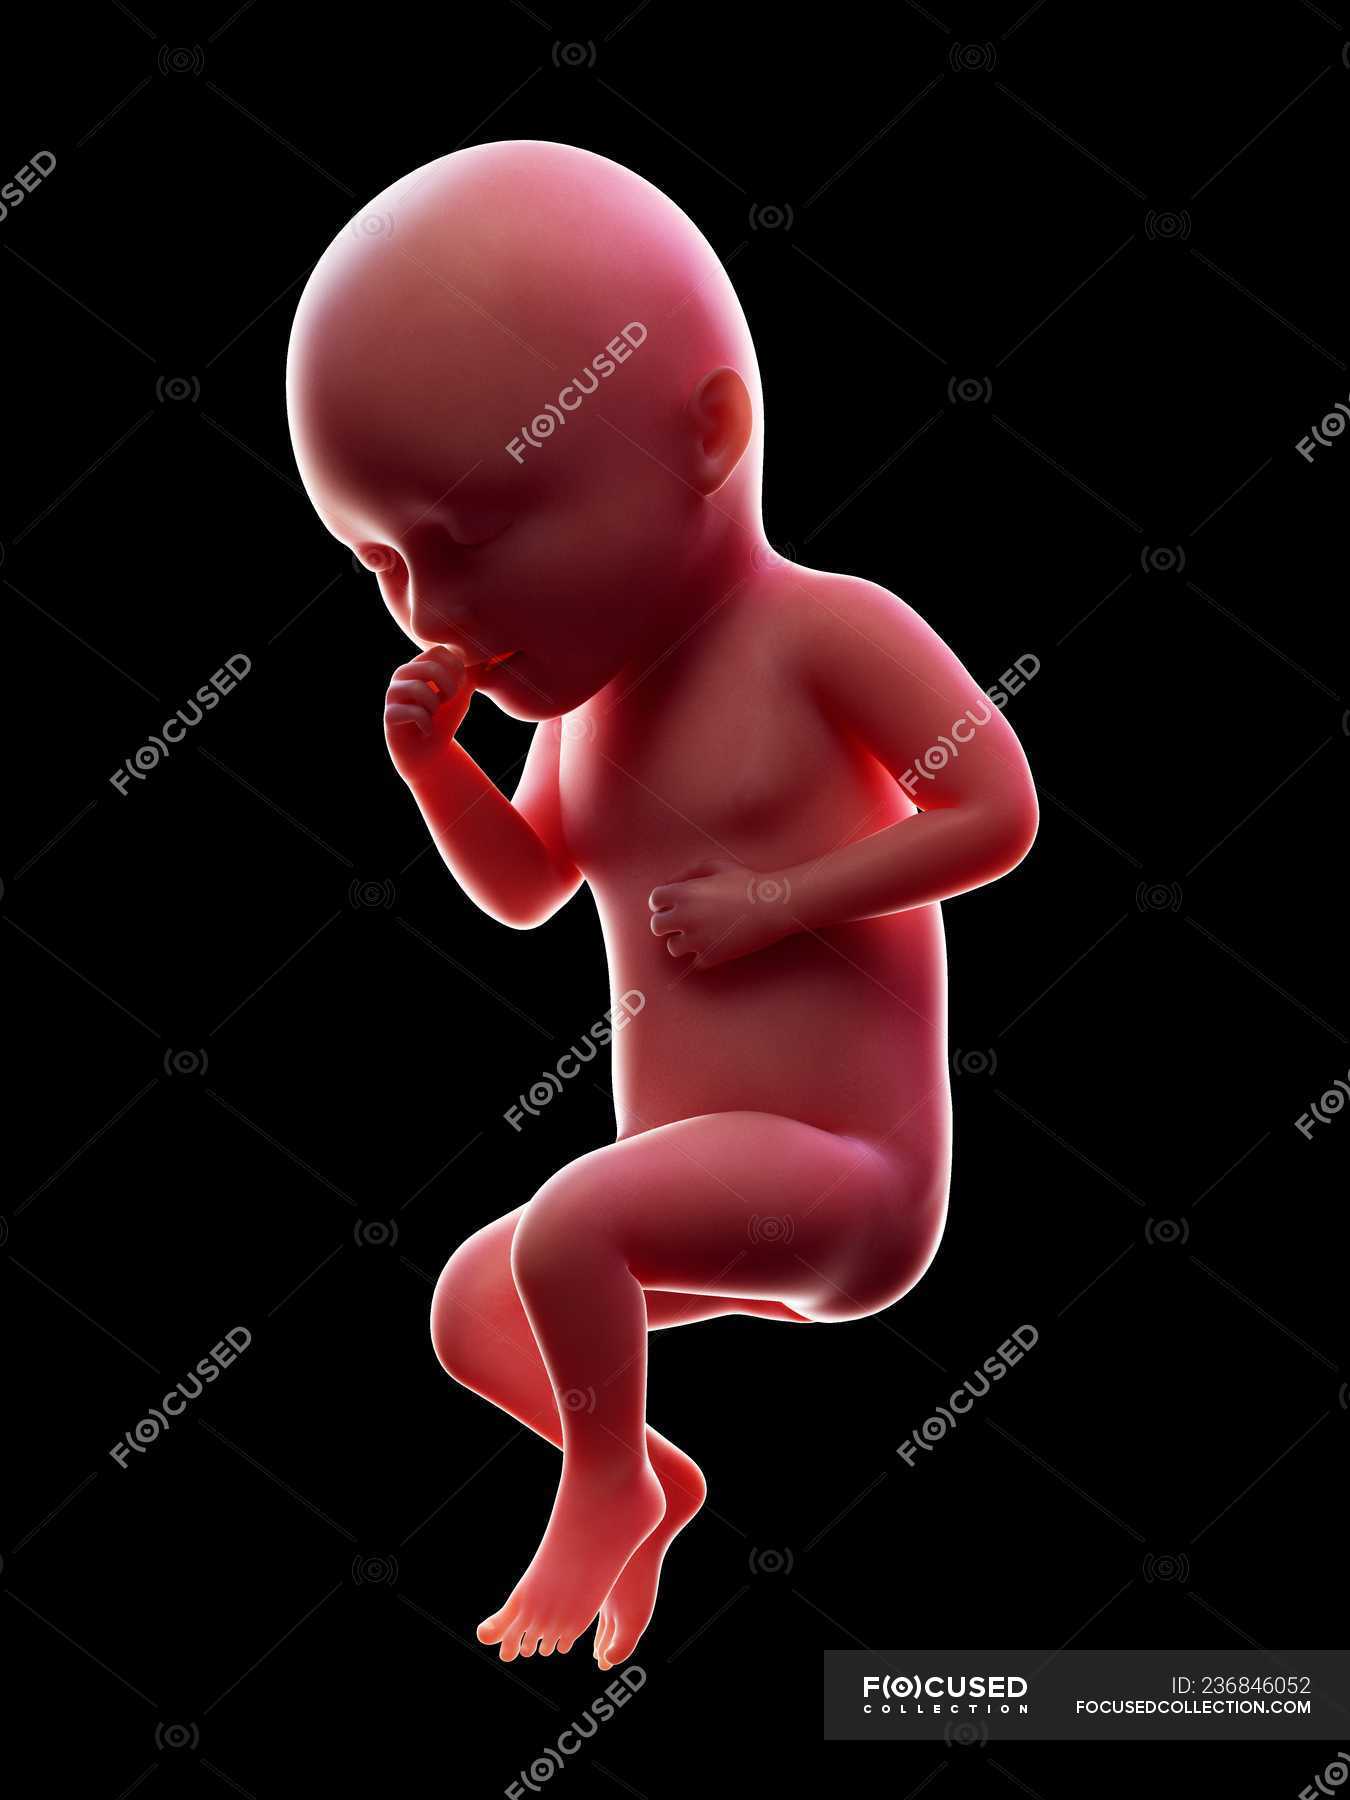 Illustration of red human embryo on black background at pregnancy stage of  week 34. — reproduction, medical - Stock Photo | #236846052